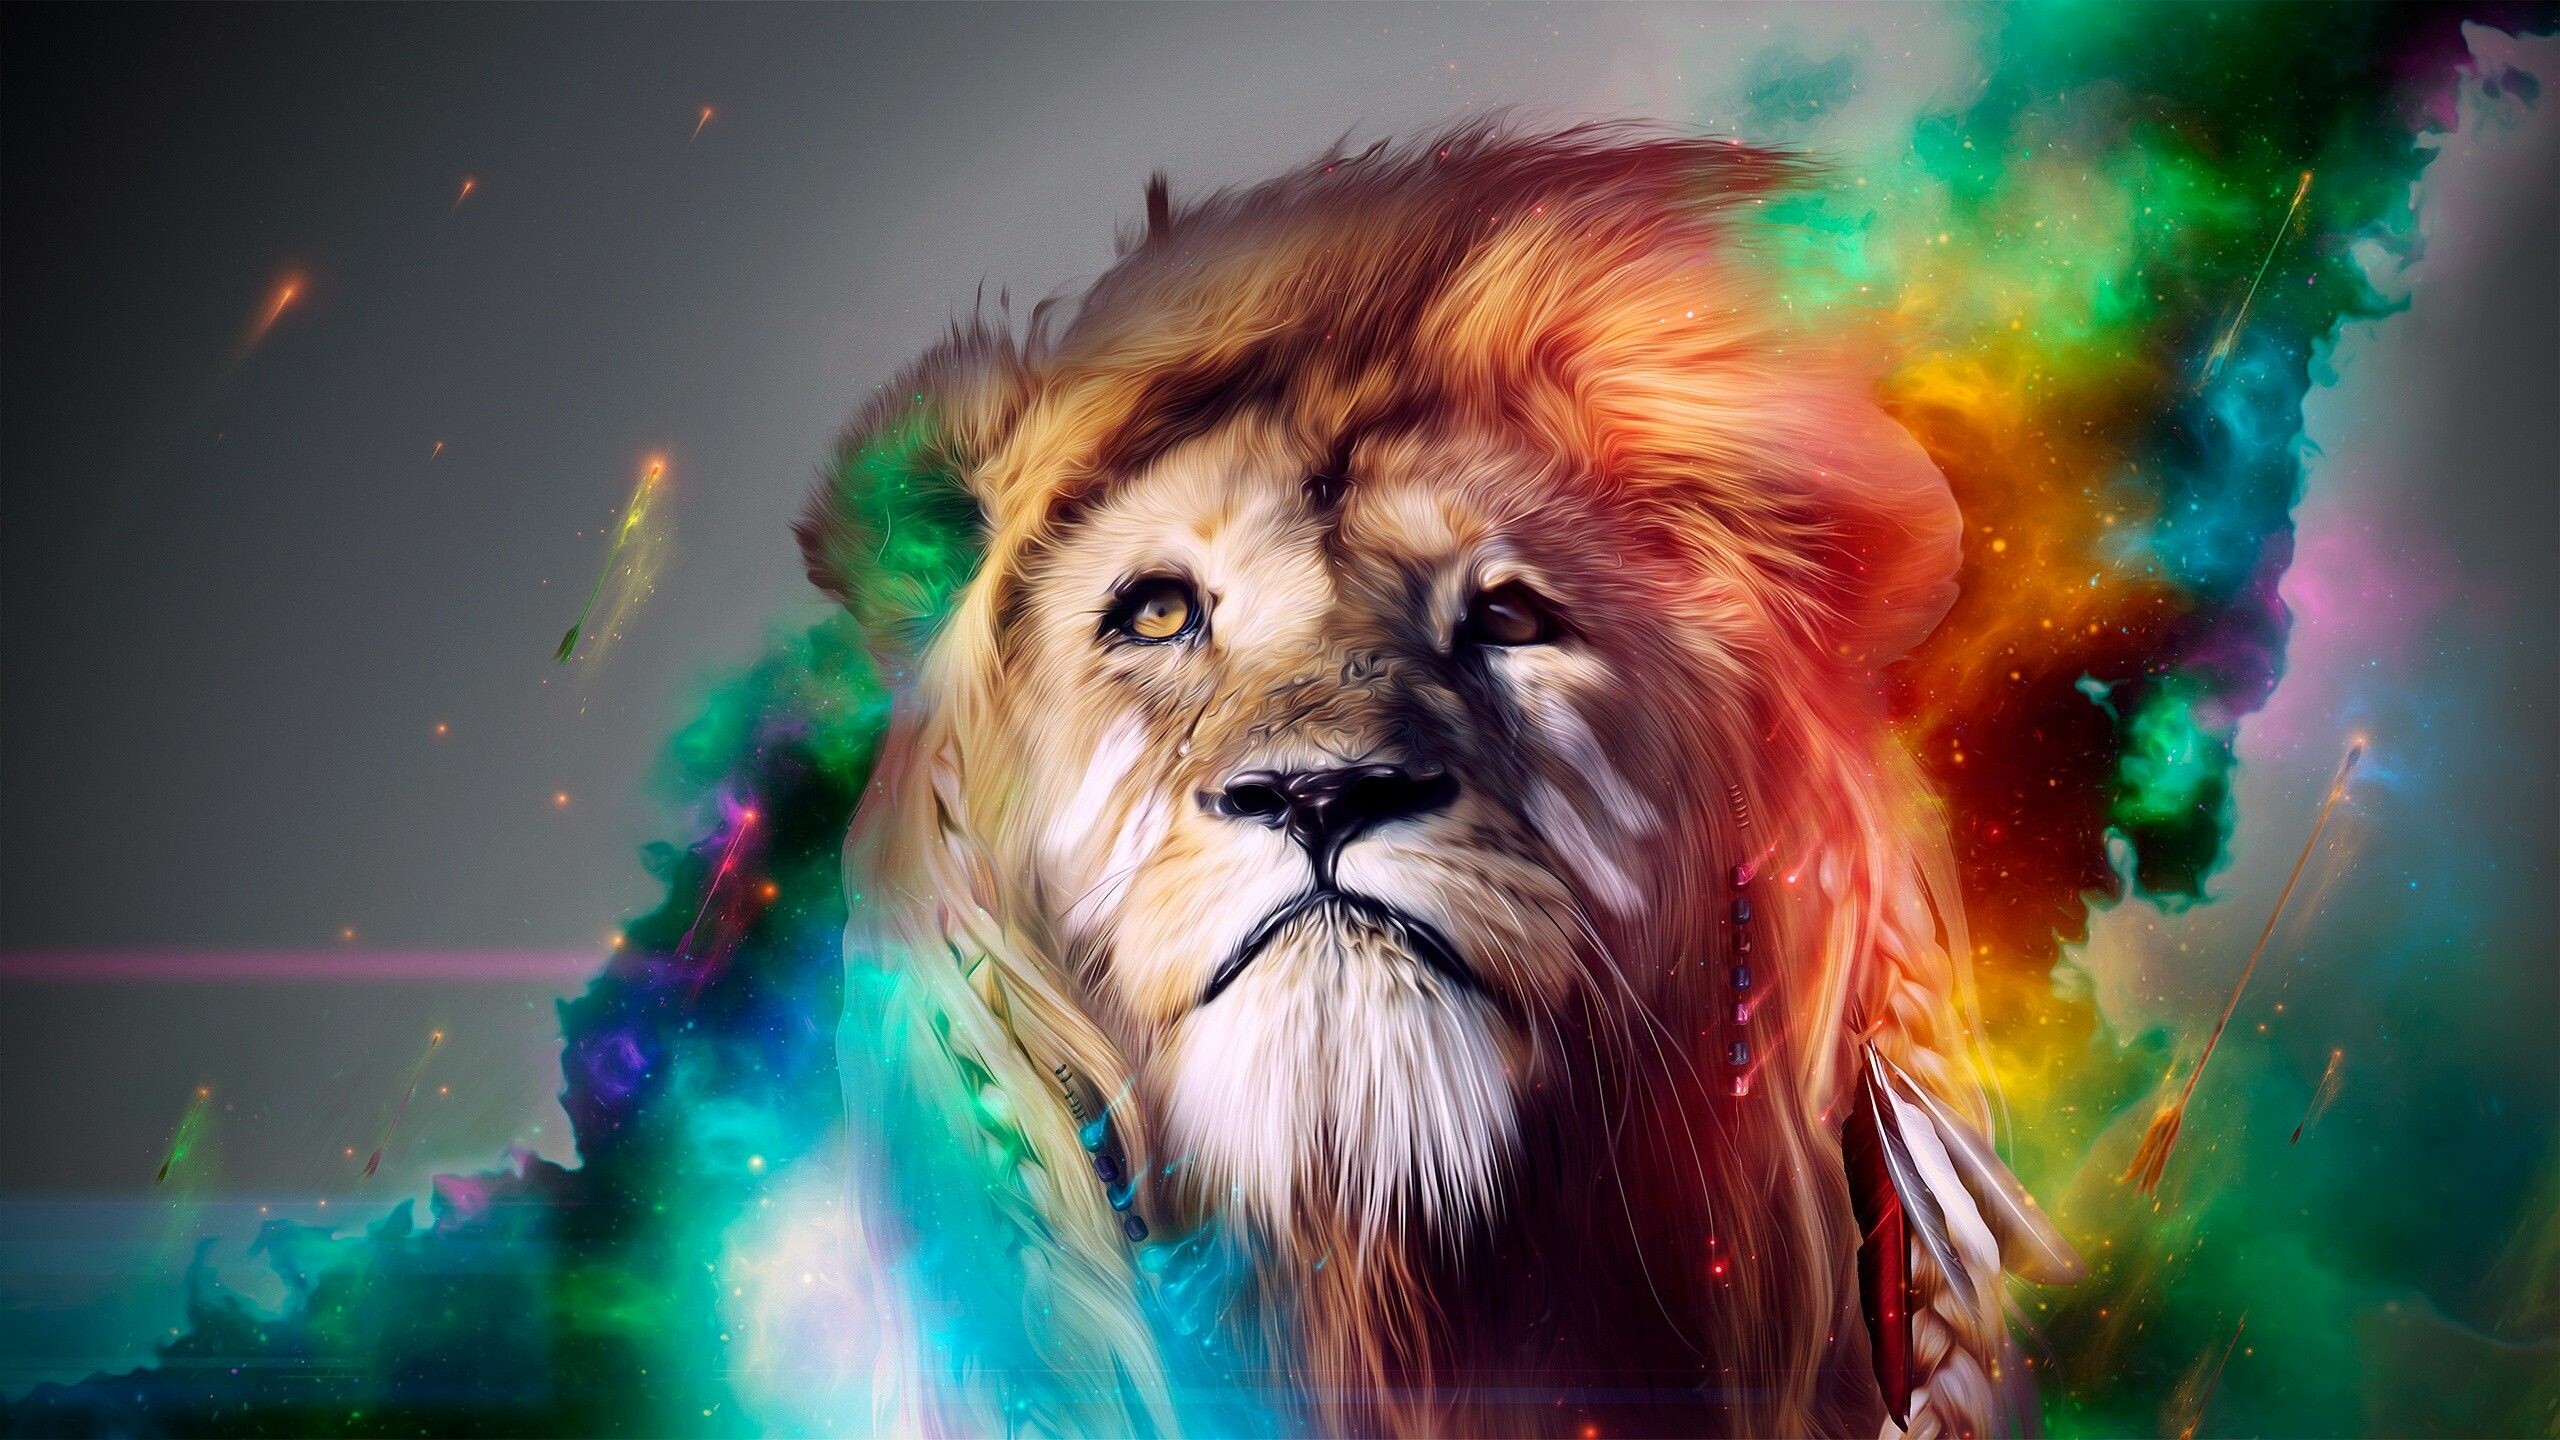 Lion: Lions most often roar at night, a sound that can be heard from a distance of 8 kilometers, Painting, Colorful. 2560x1440 HD Wallpaper.